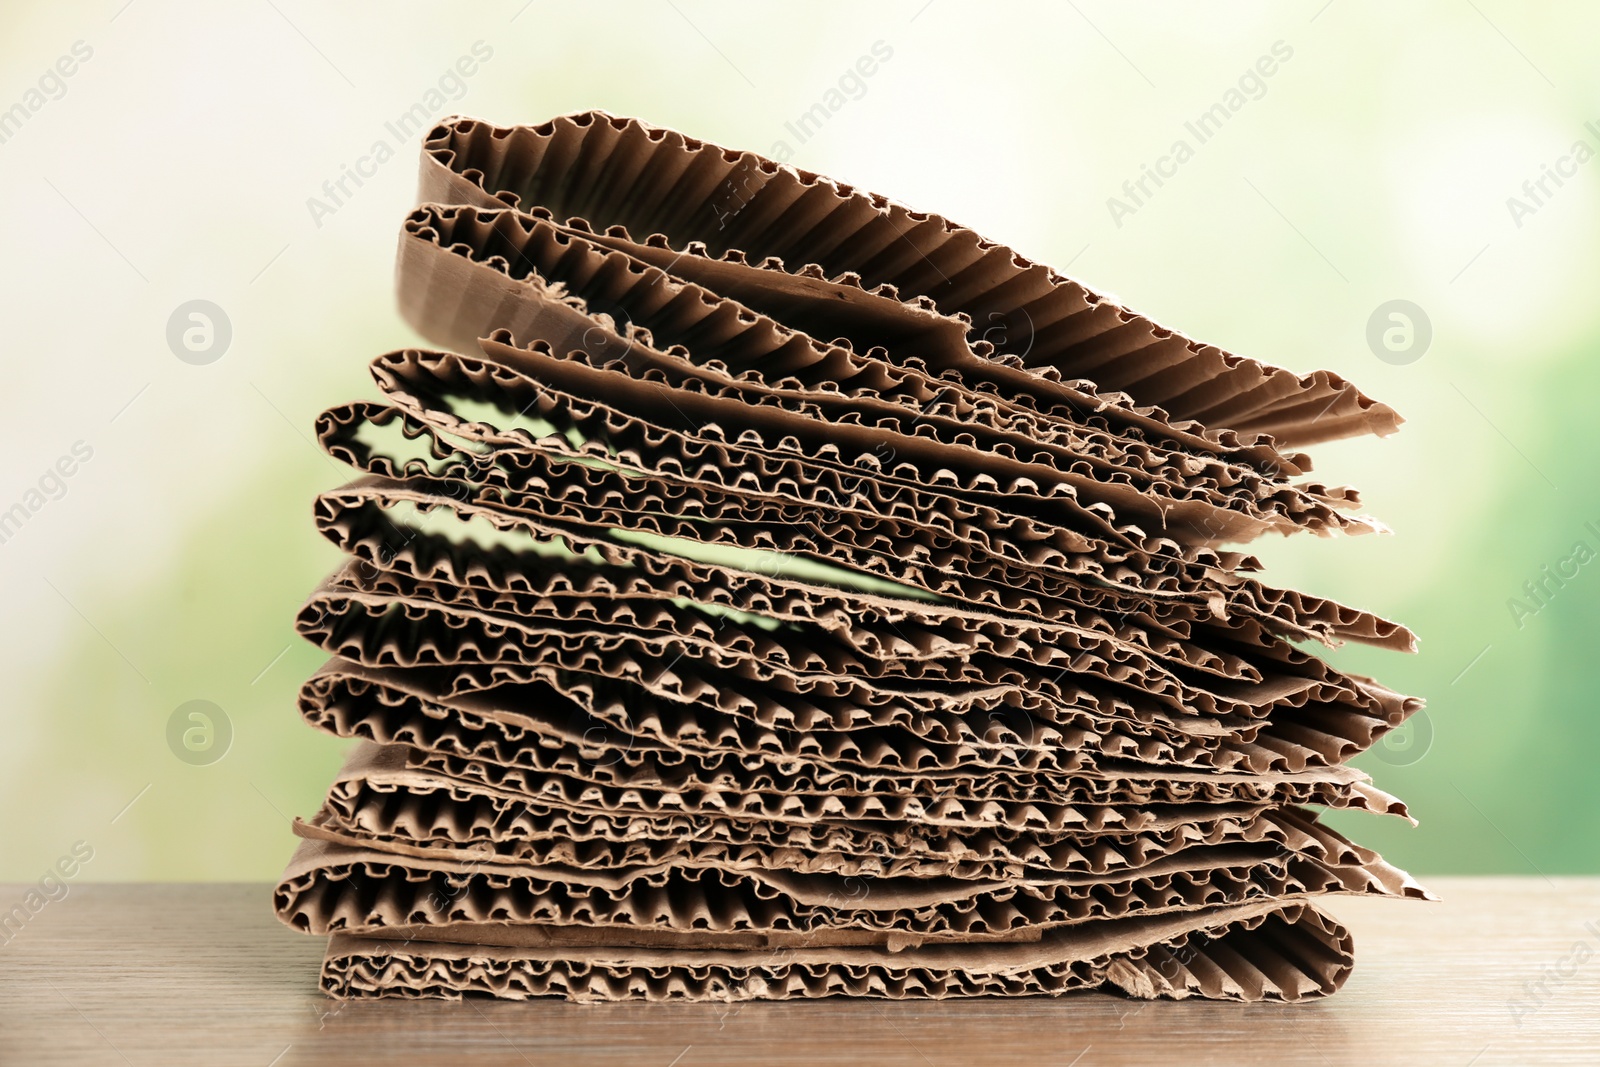 Photo of Stack of cardboard for recycling on table against blurred background